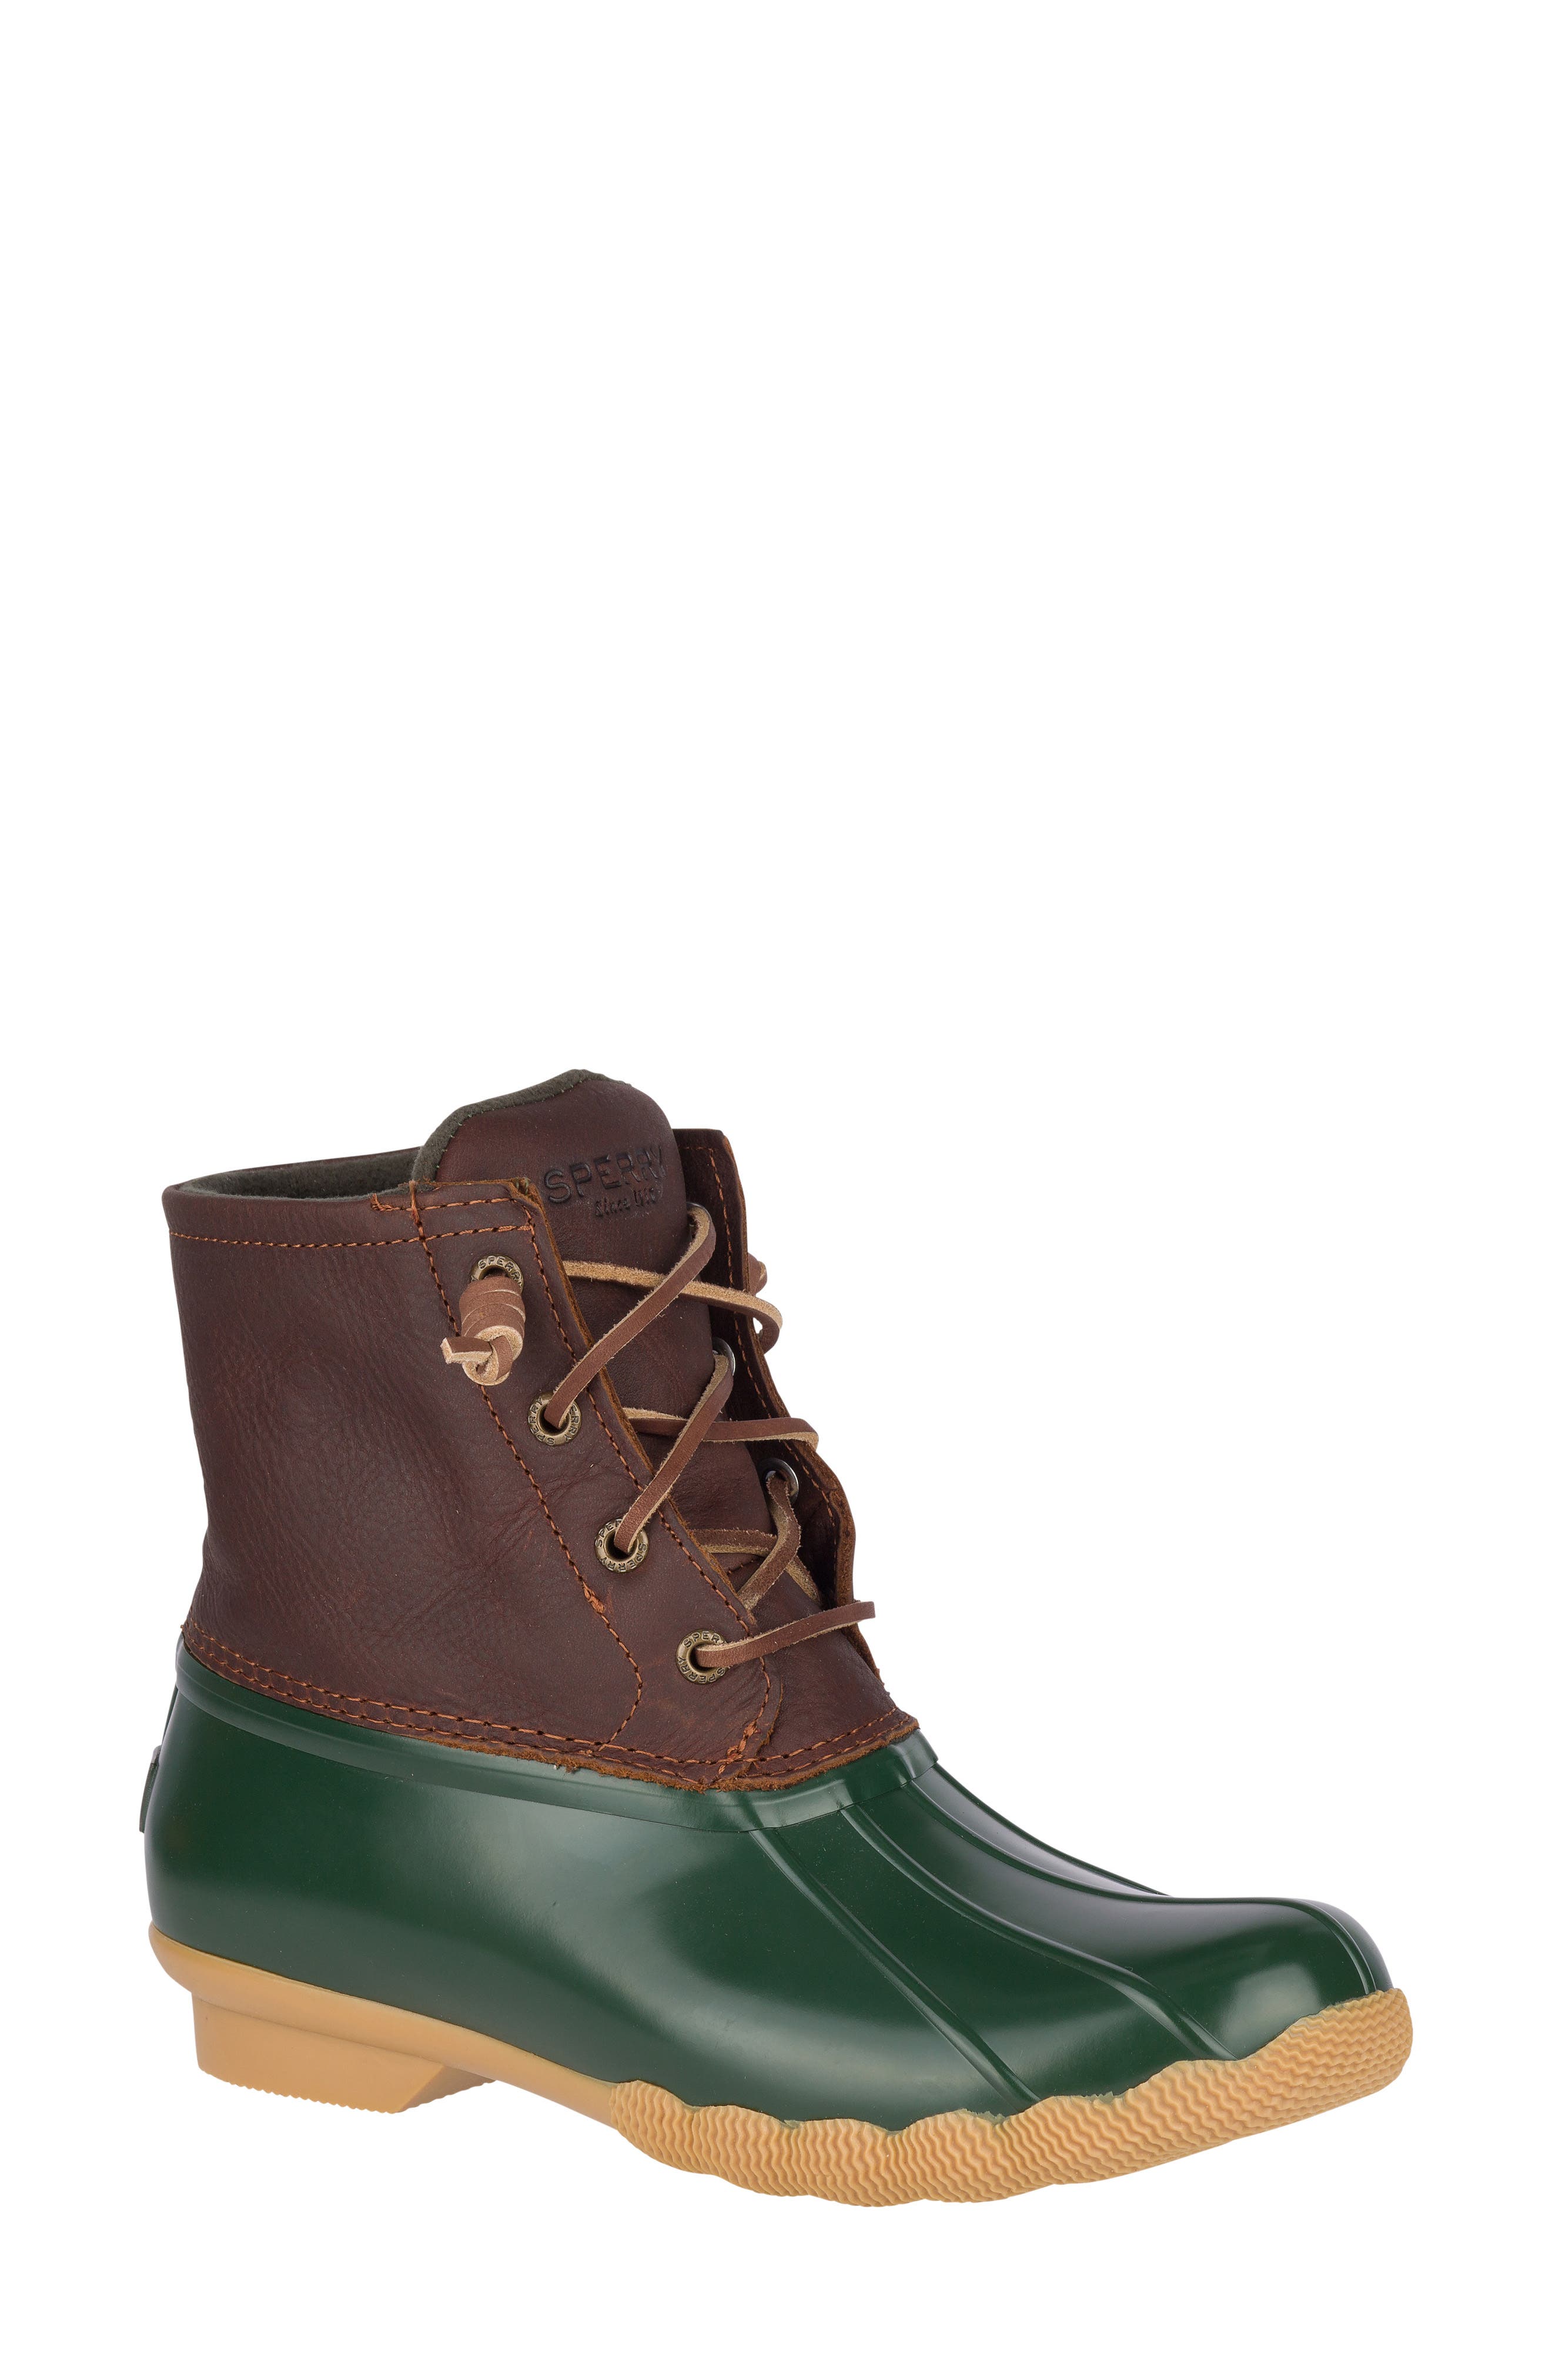 sperry wedge duck boots